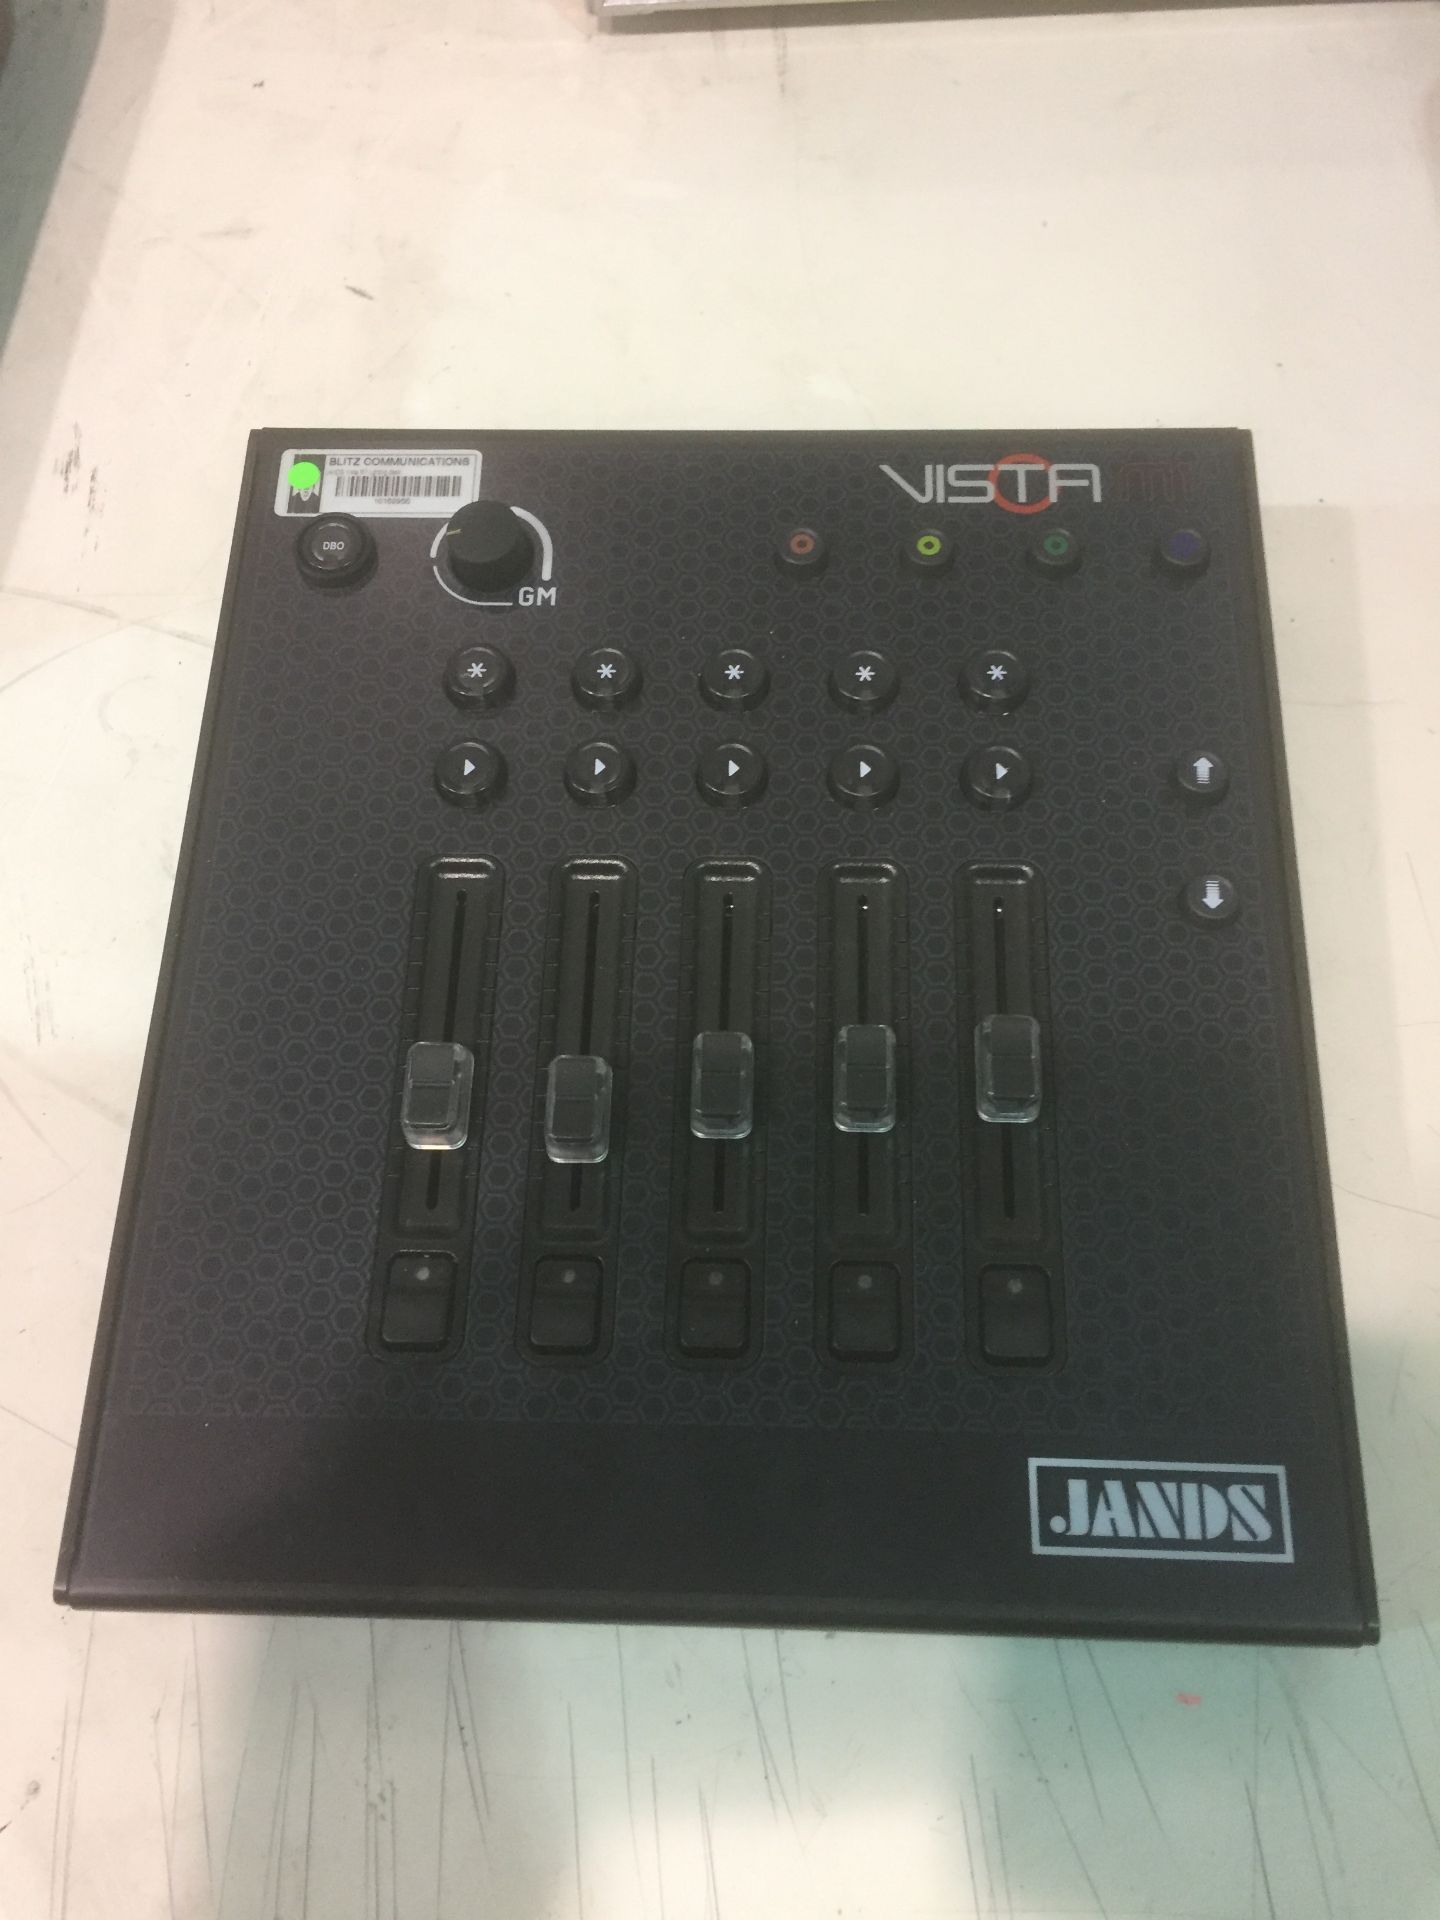 Jands Vista M1 control surface, S/N M13677, Jands 4PAKII Four Channel dimmer/controller, S/N